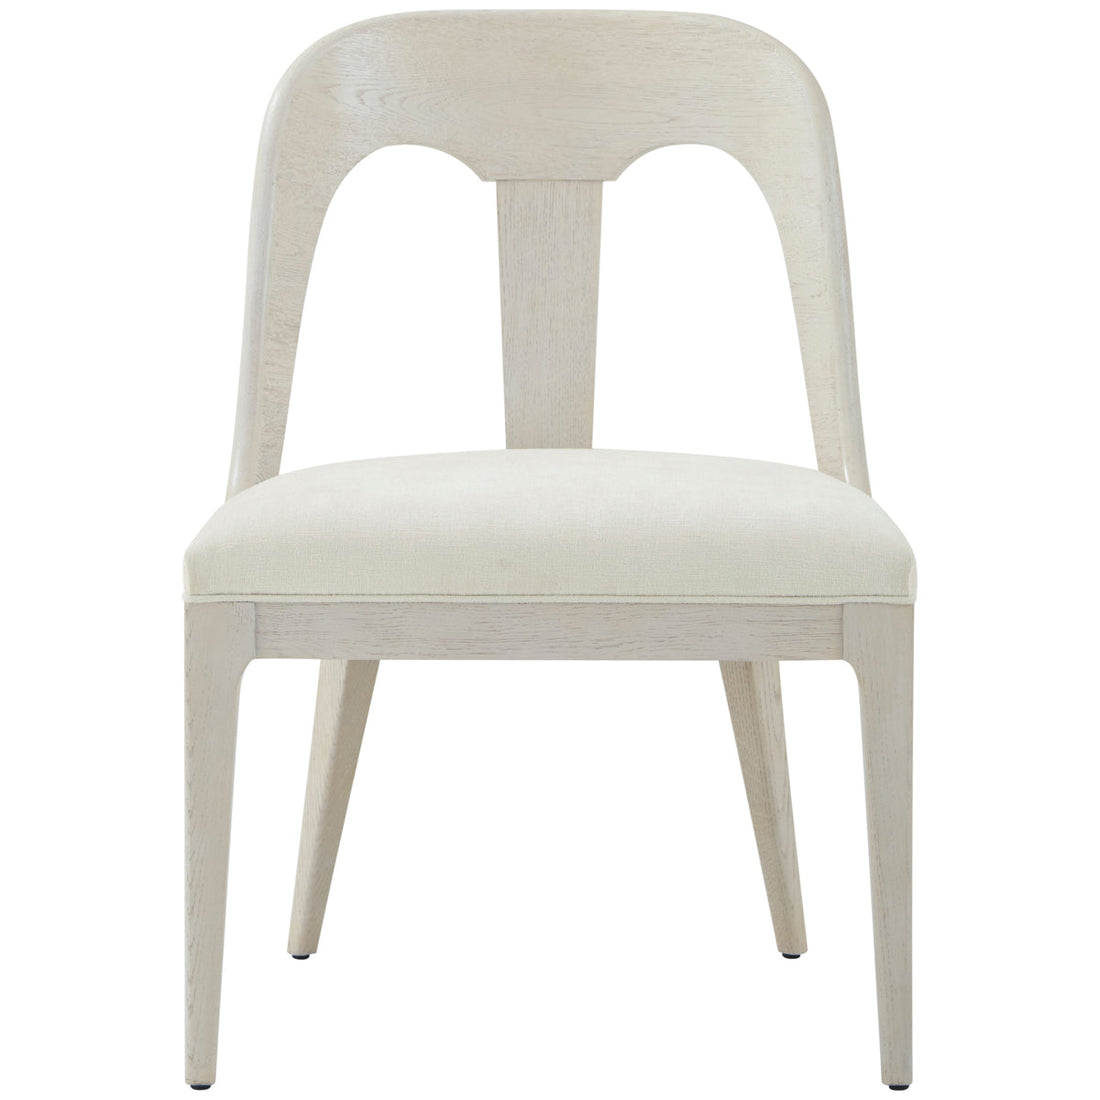 Theodore Alexander Essence Dining Side Chair, Set of 2